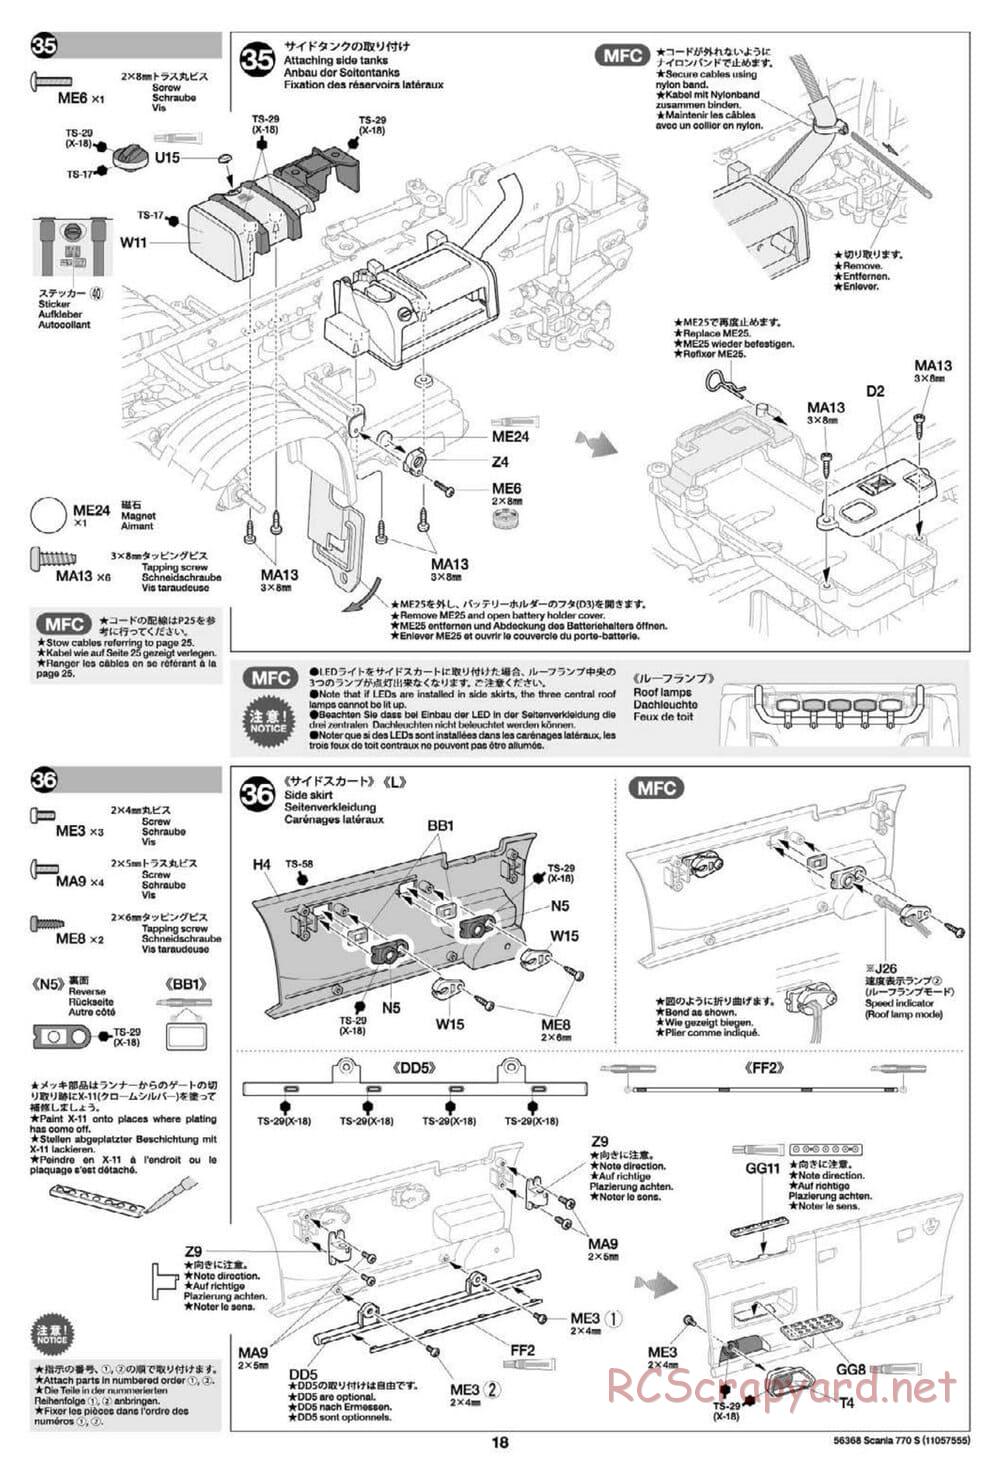 Tamiya - Scania 770S 6x4 Tractor Truck Chassis - Manual - Page 18